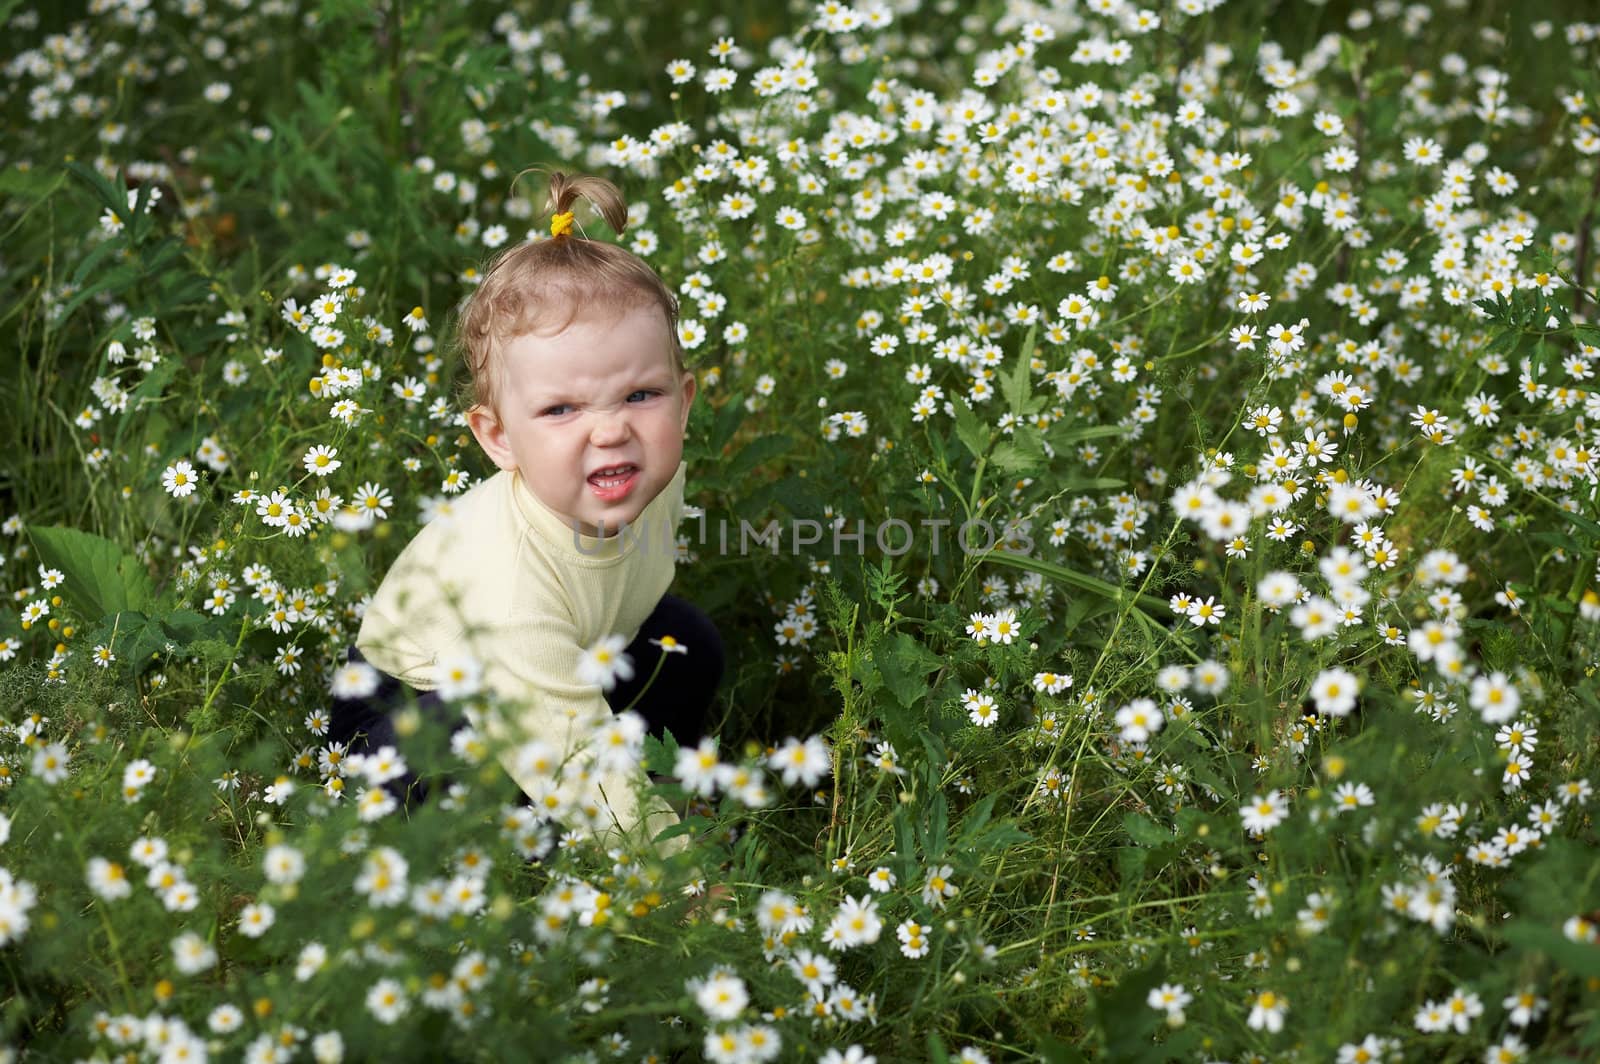 Baby-girl amongst a field with little white flowers